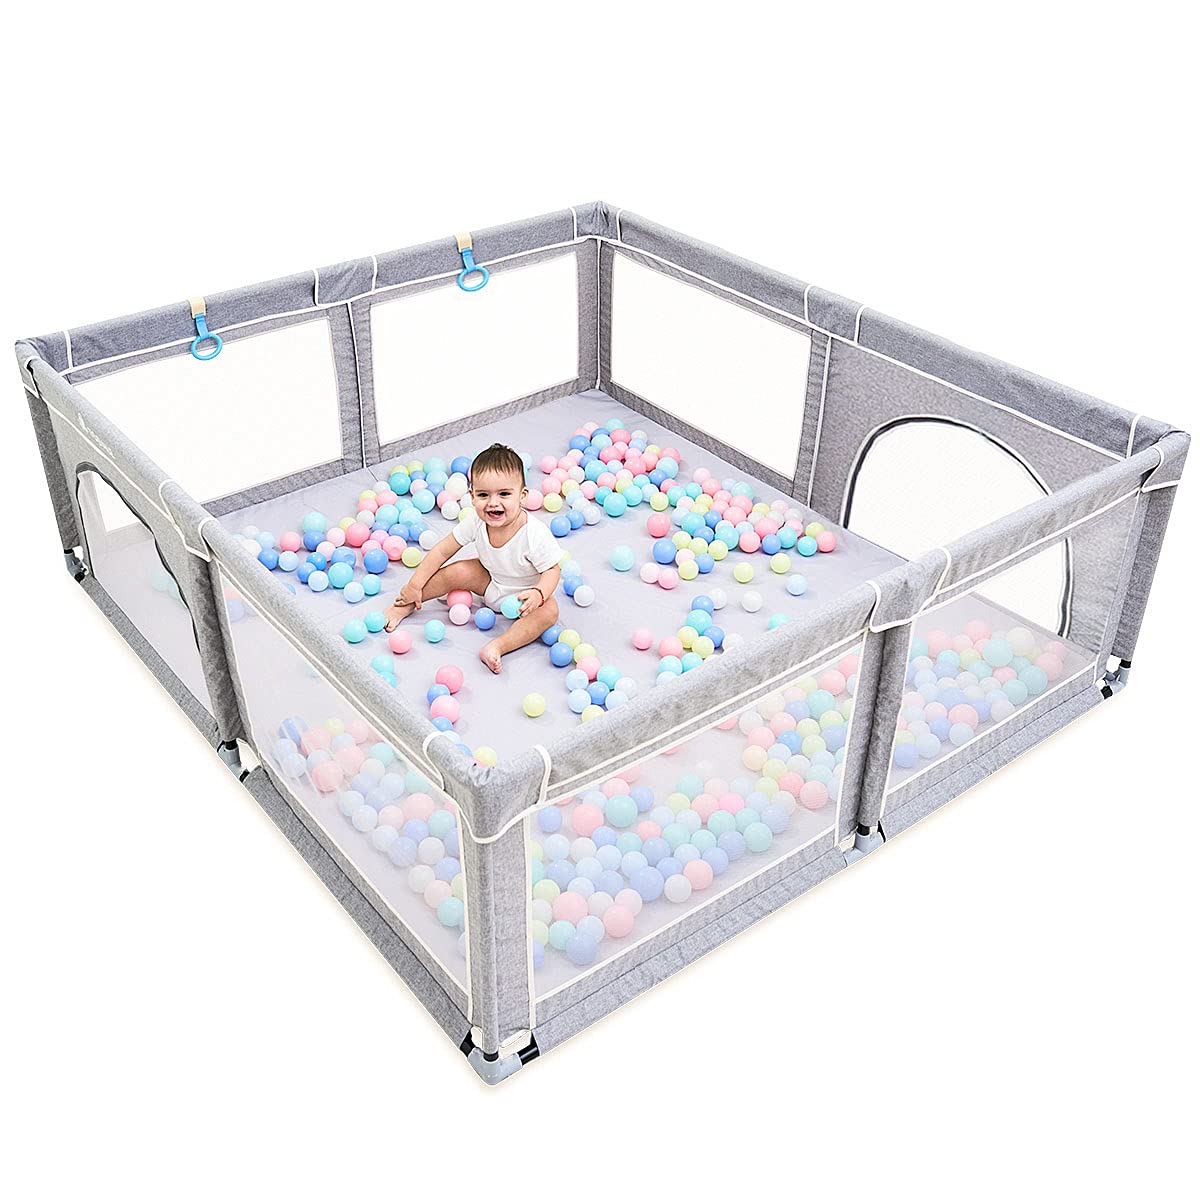 Photo 1 of Baby PlaypenPlaypens for Babies Extra Large Playpen for ToddlersKids Safety Play Center Yard with gate Sturdy Safety Baby Fence Play Area for Babies